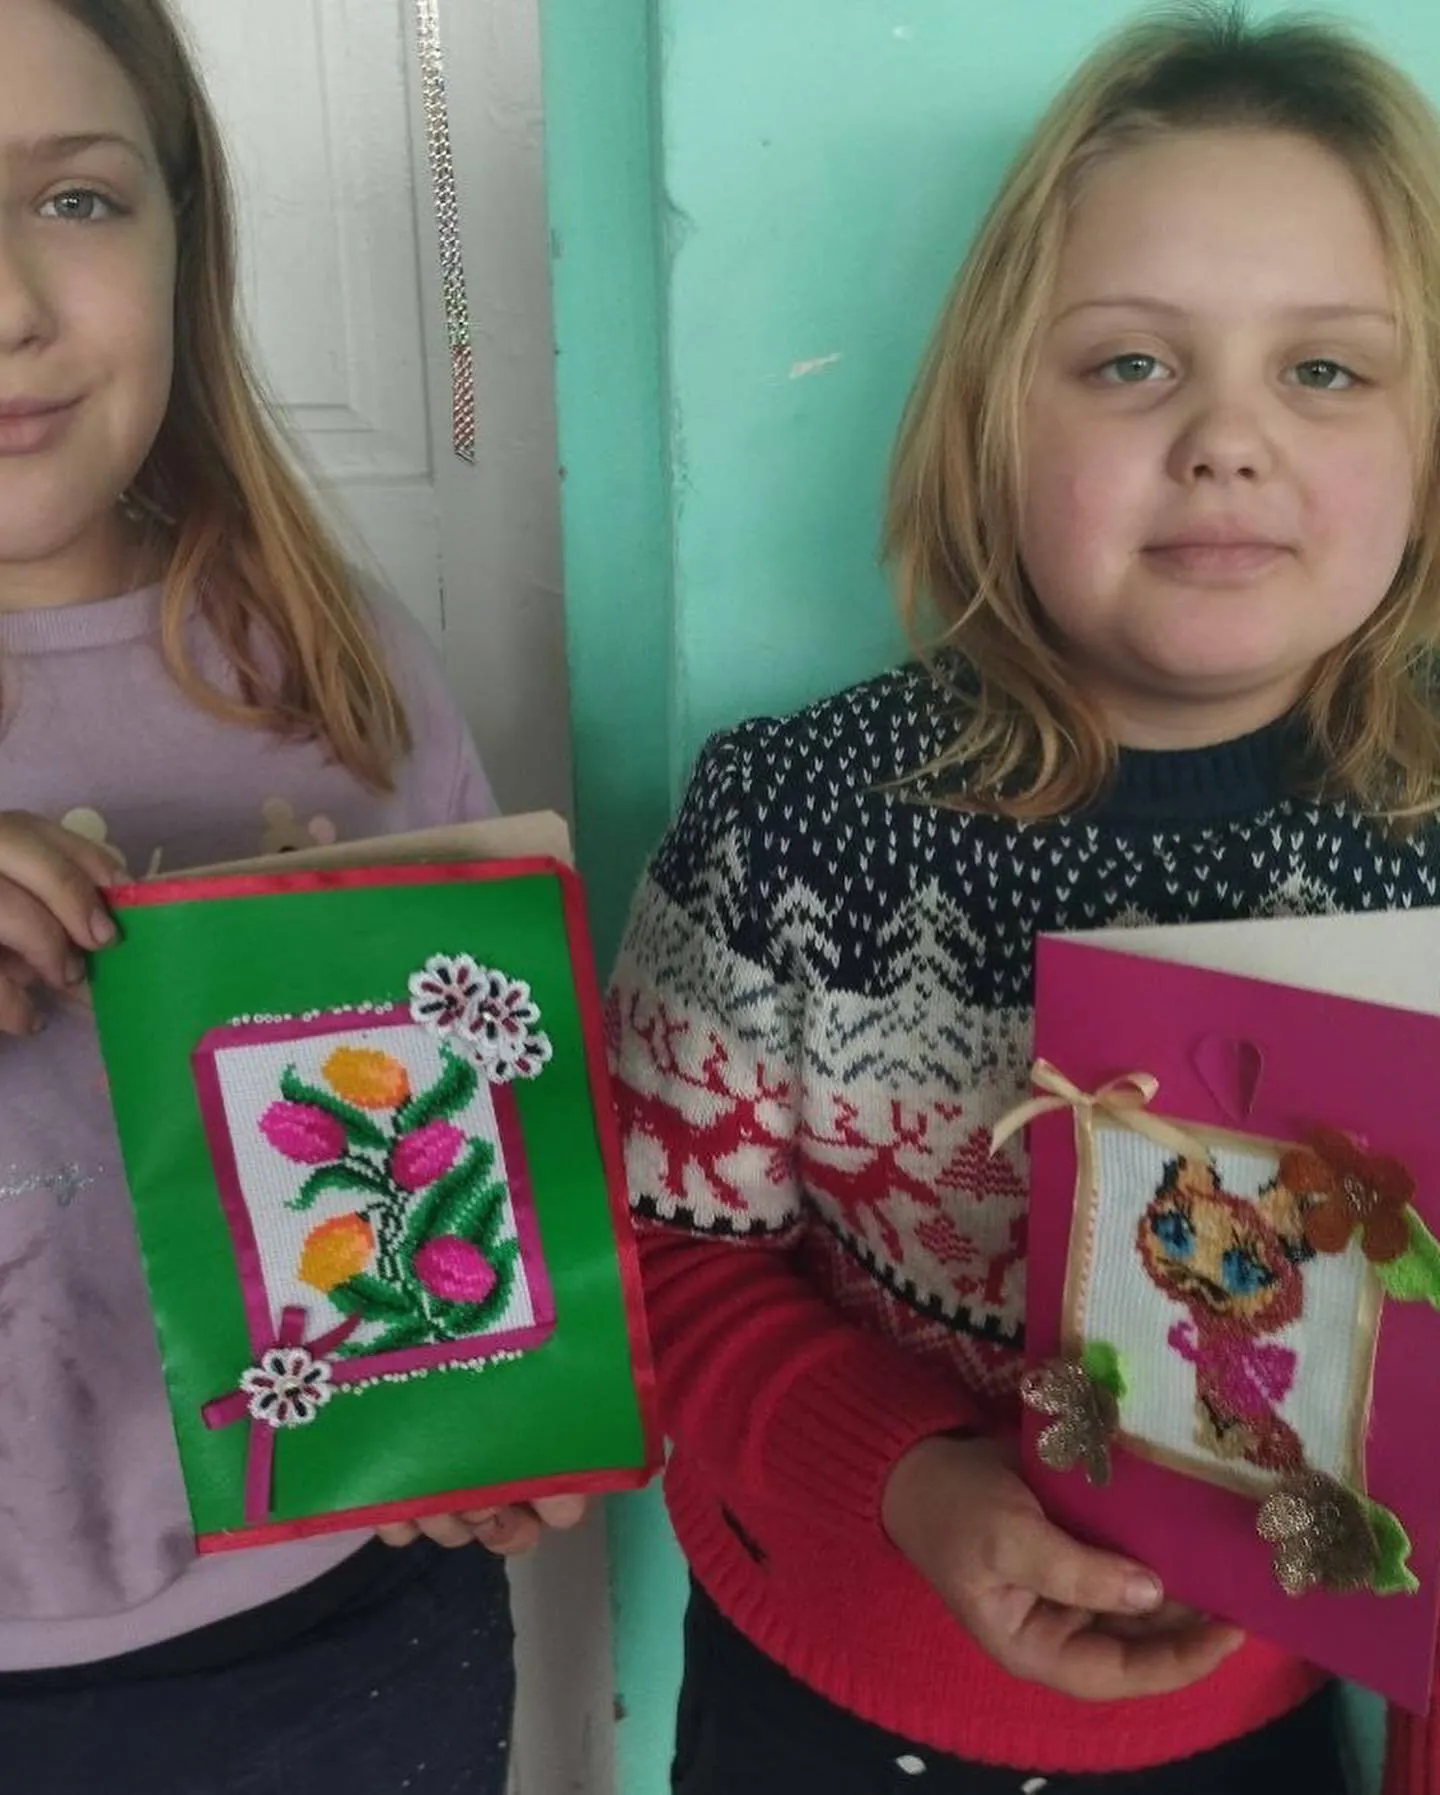 two young girls are holding small cards and a picture.